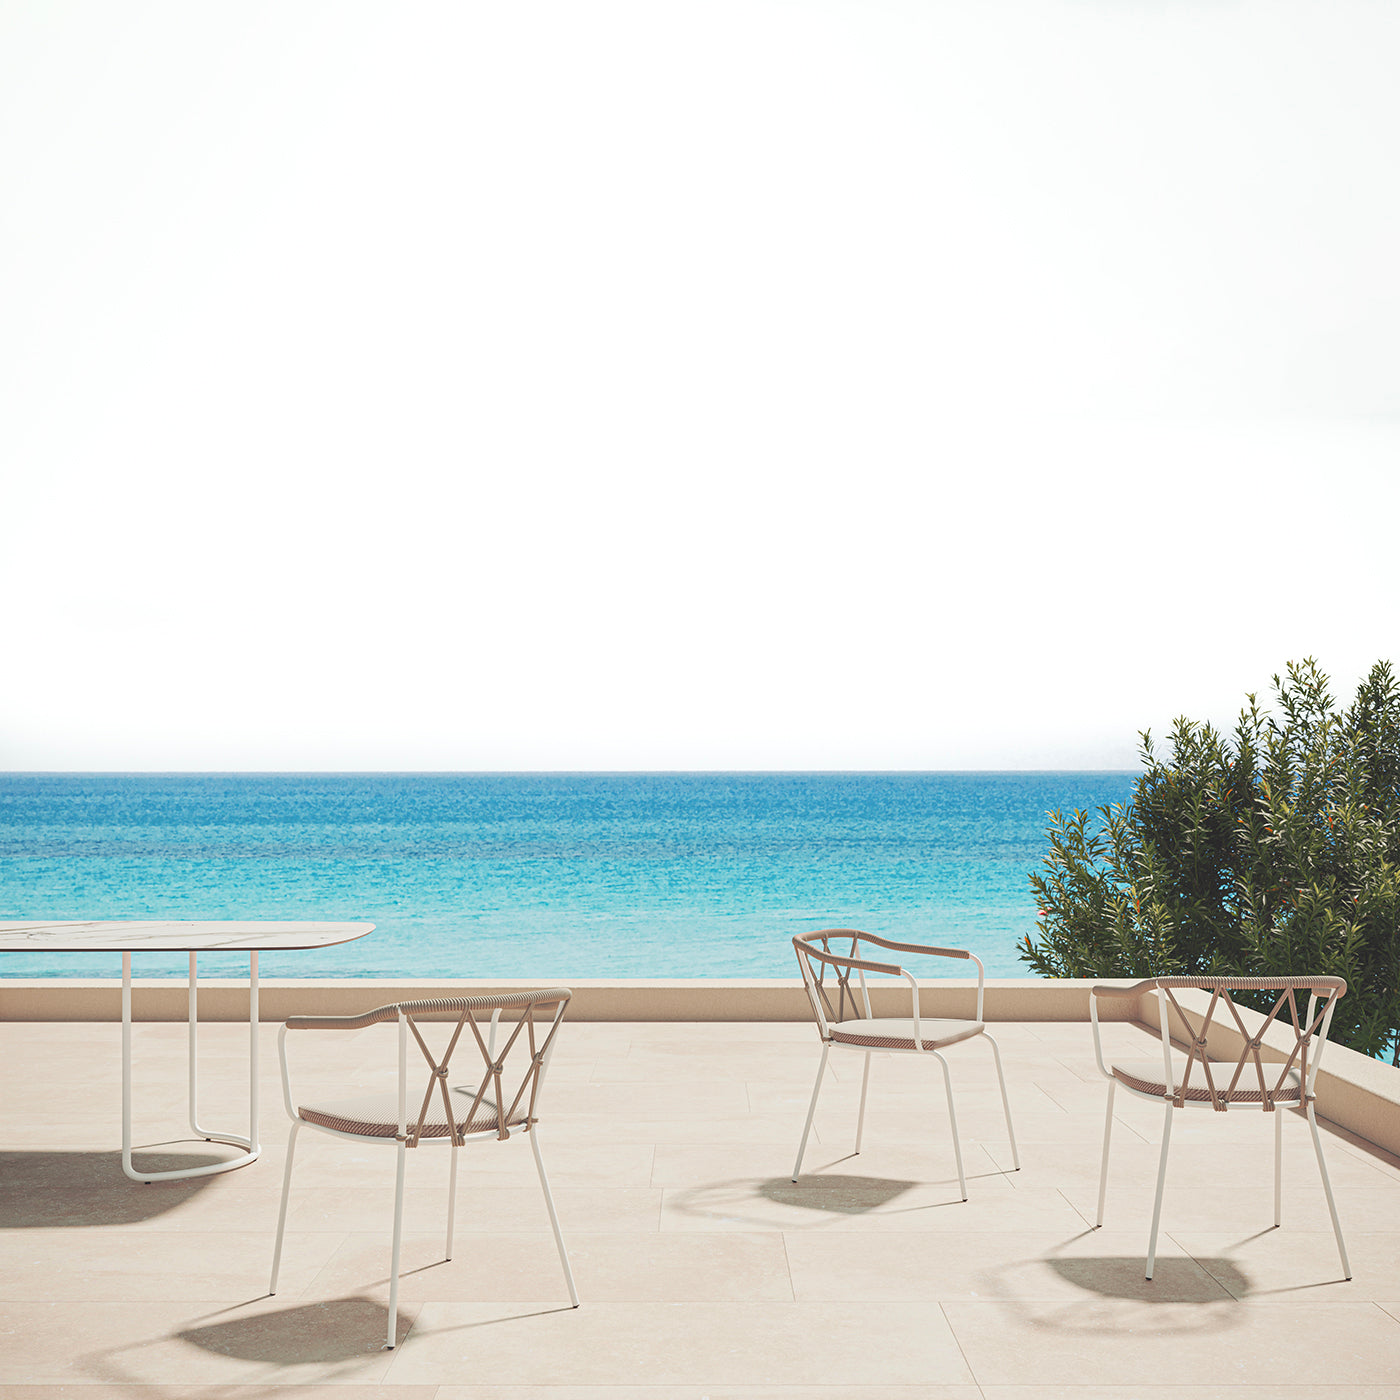 Scala Small Beige Outdoor Chair by Marco Piva - Alternative view 2